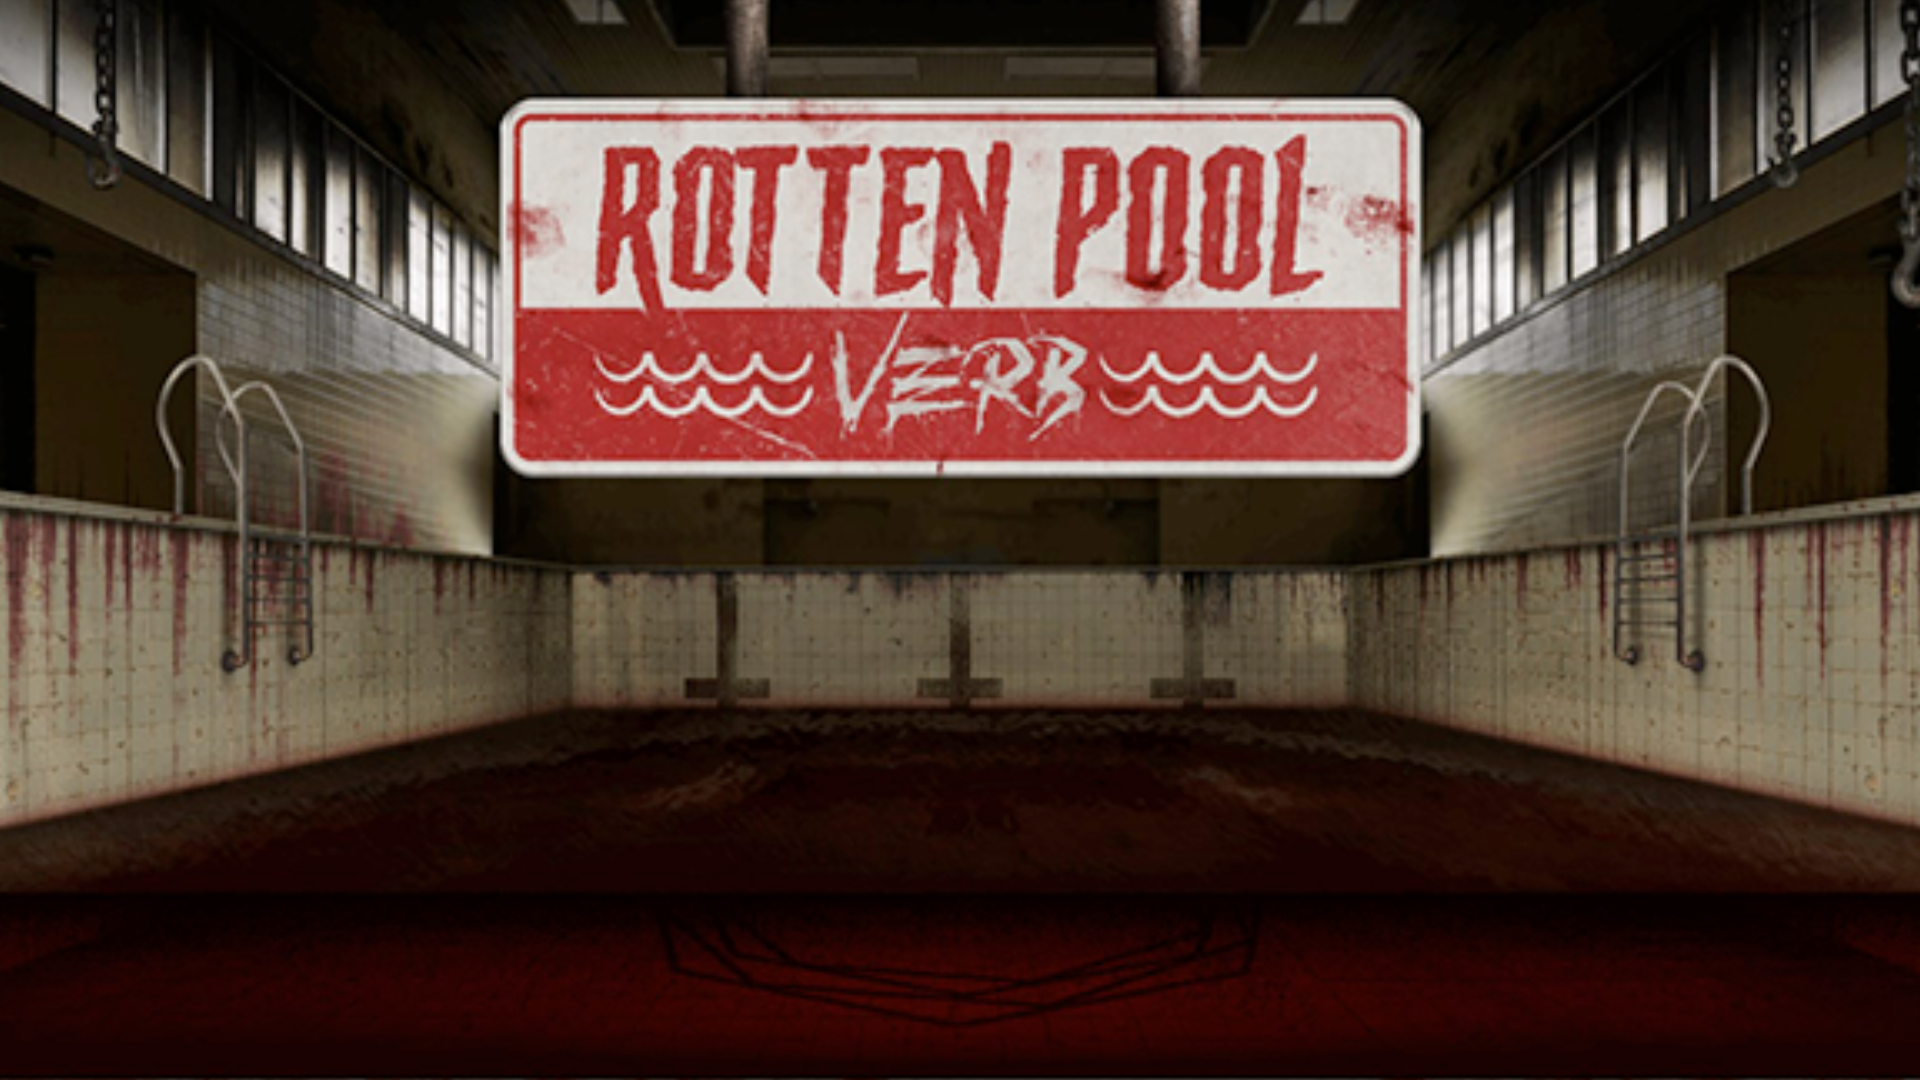 Aurora DSP Rotten Pool Verb 1.1.5 instal the new for apple